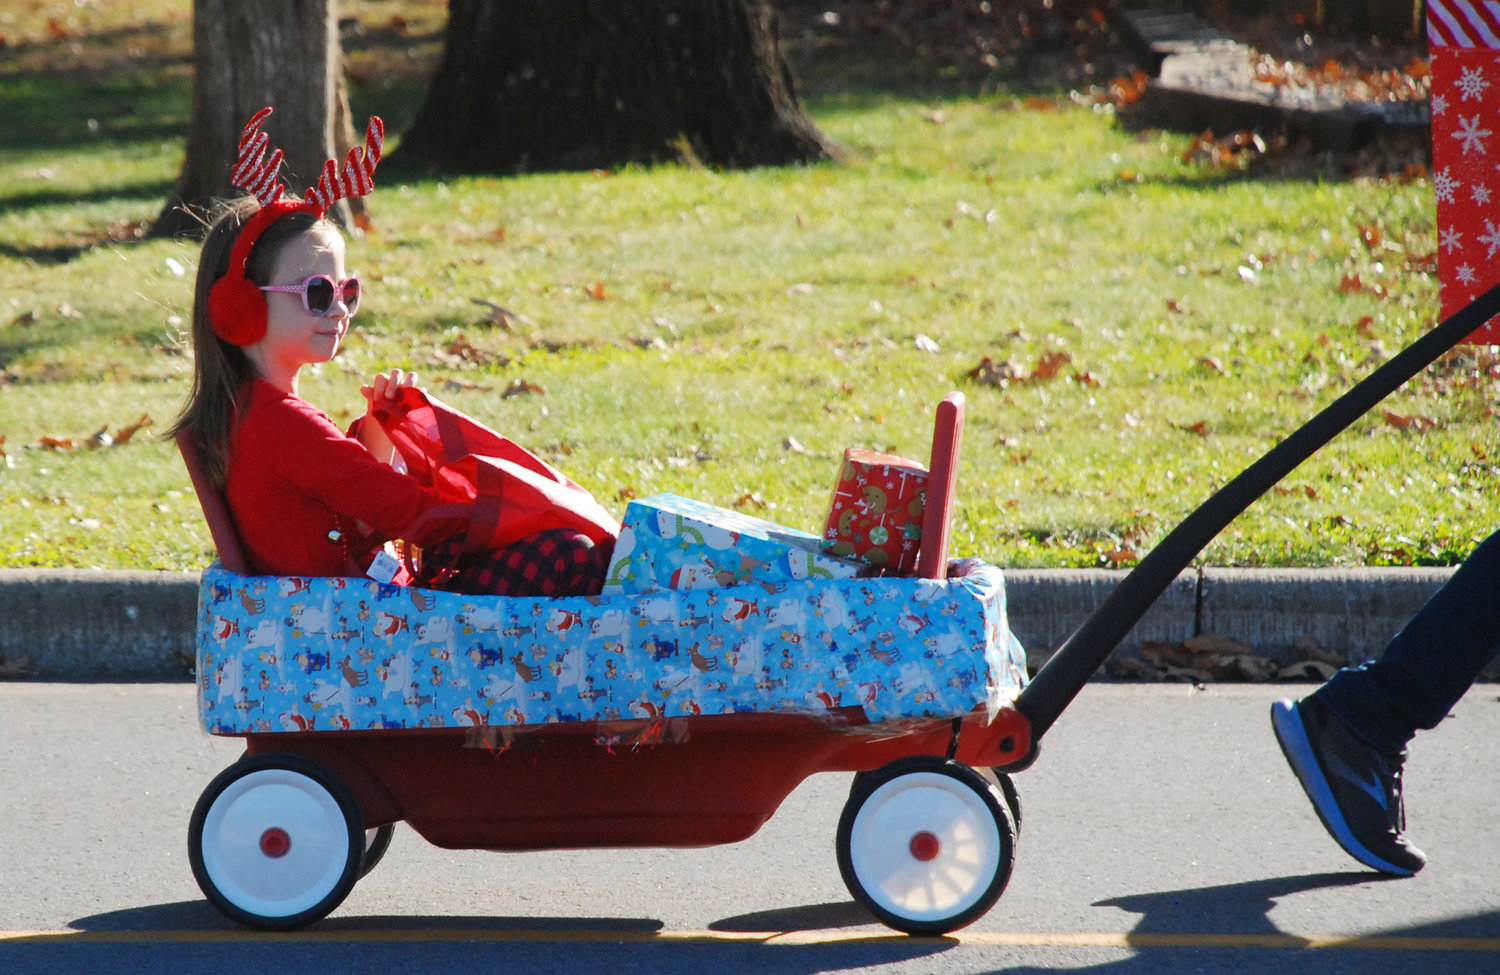 HITCHING A RIDE — A girl rides along in a wagon on a sunny December day.